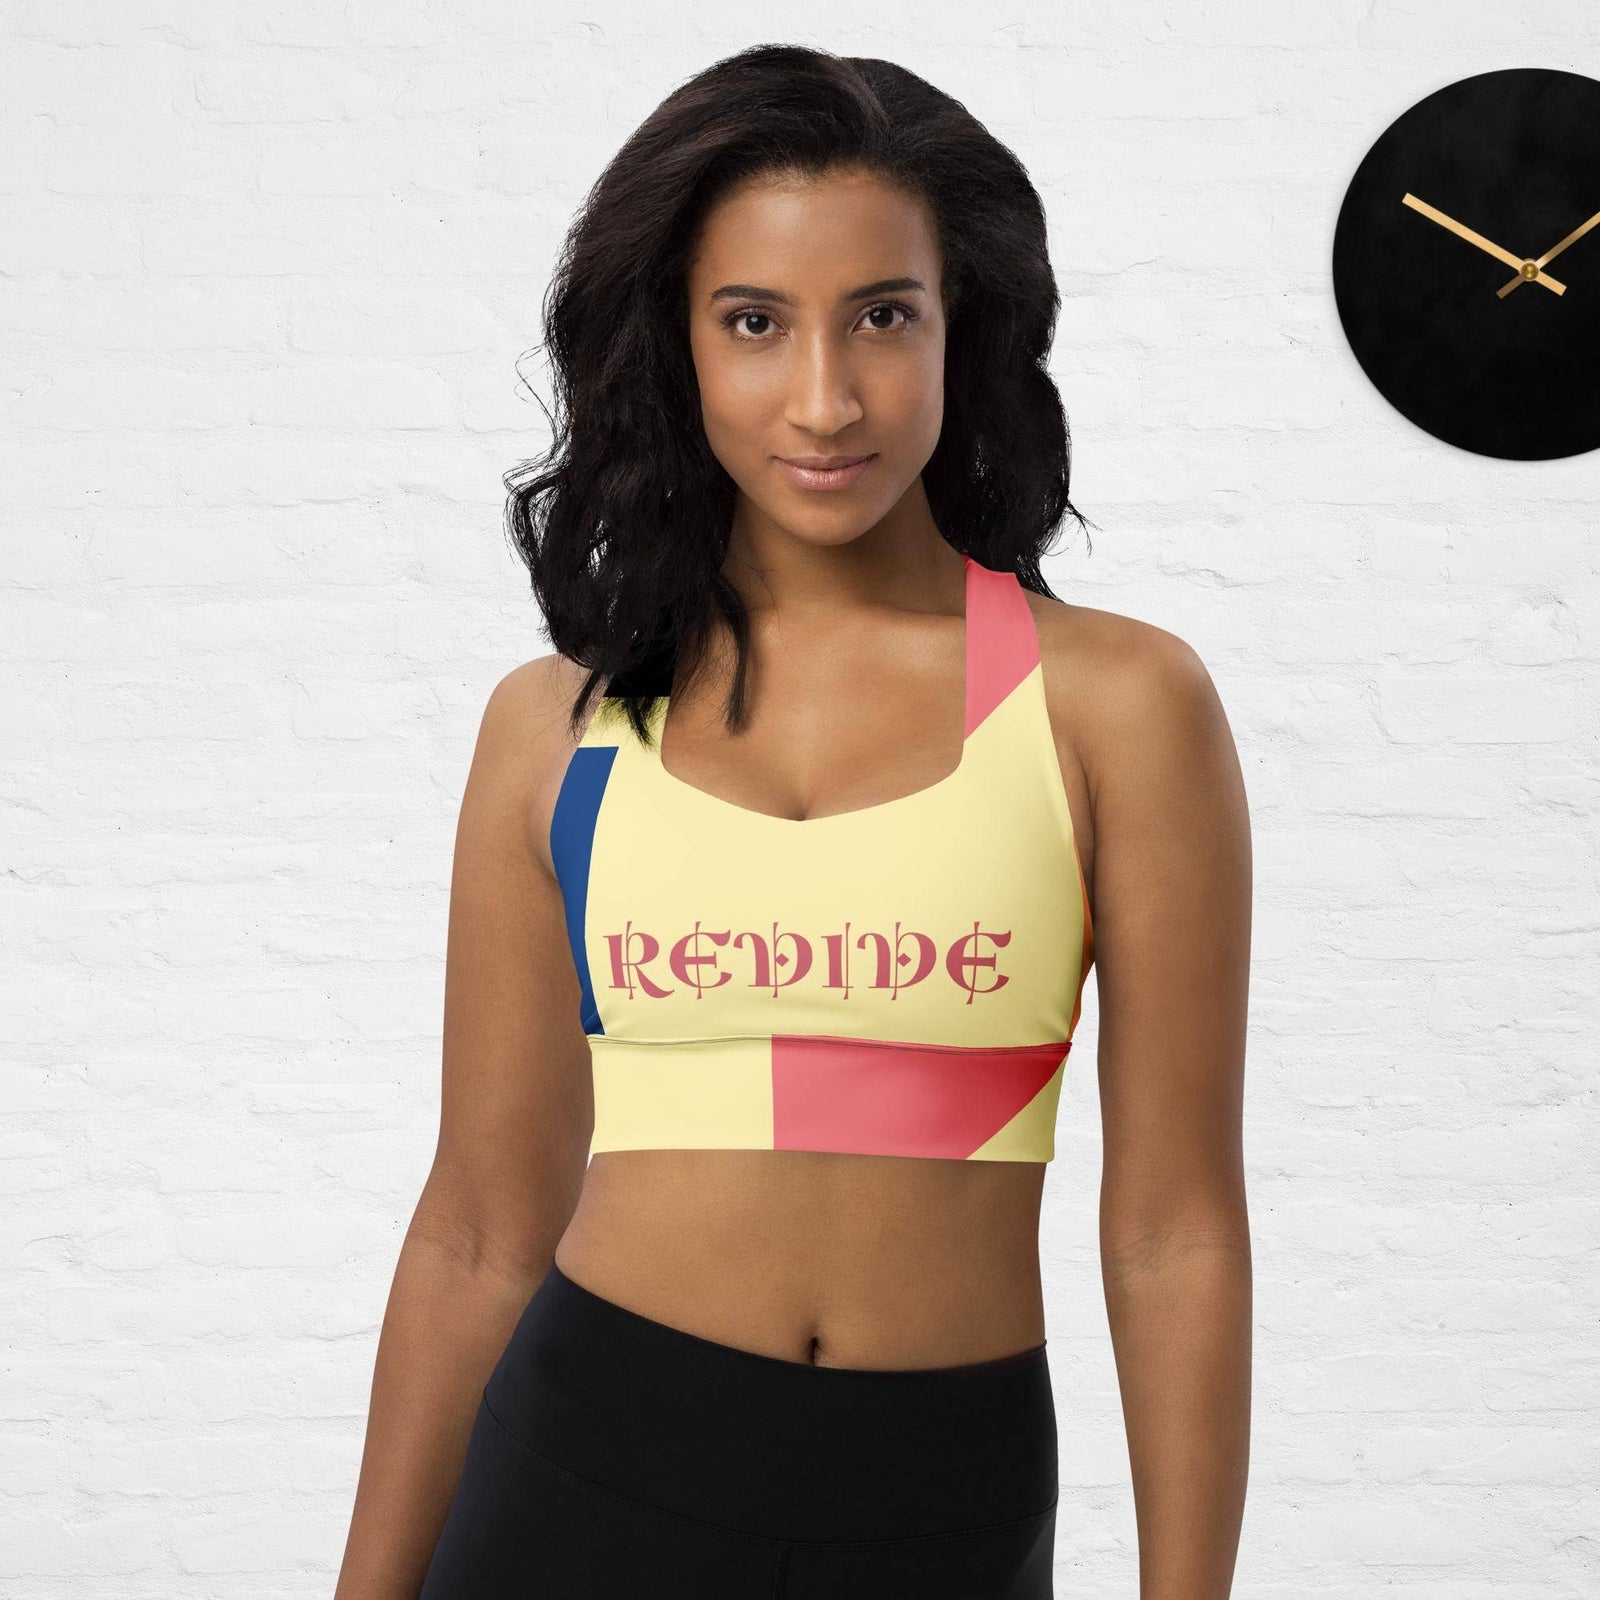 Activewear Longline Sports Bra in Abstract Print - Revive Wear     Elevate your workout with our Active Abstract Longline Sports Bra. Enjoy a supportive fit, maximum comfort during workouts. Browse your size today at Revive Wear.